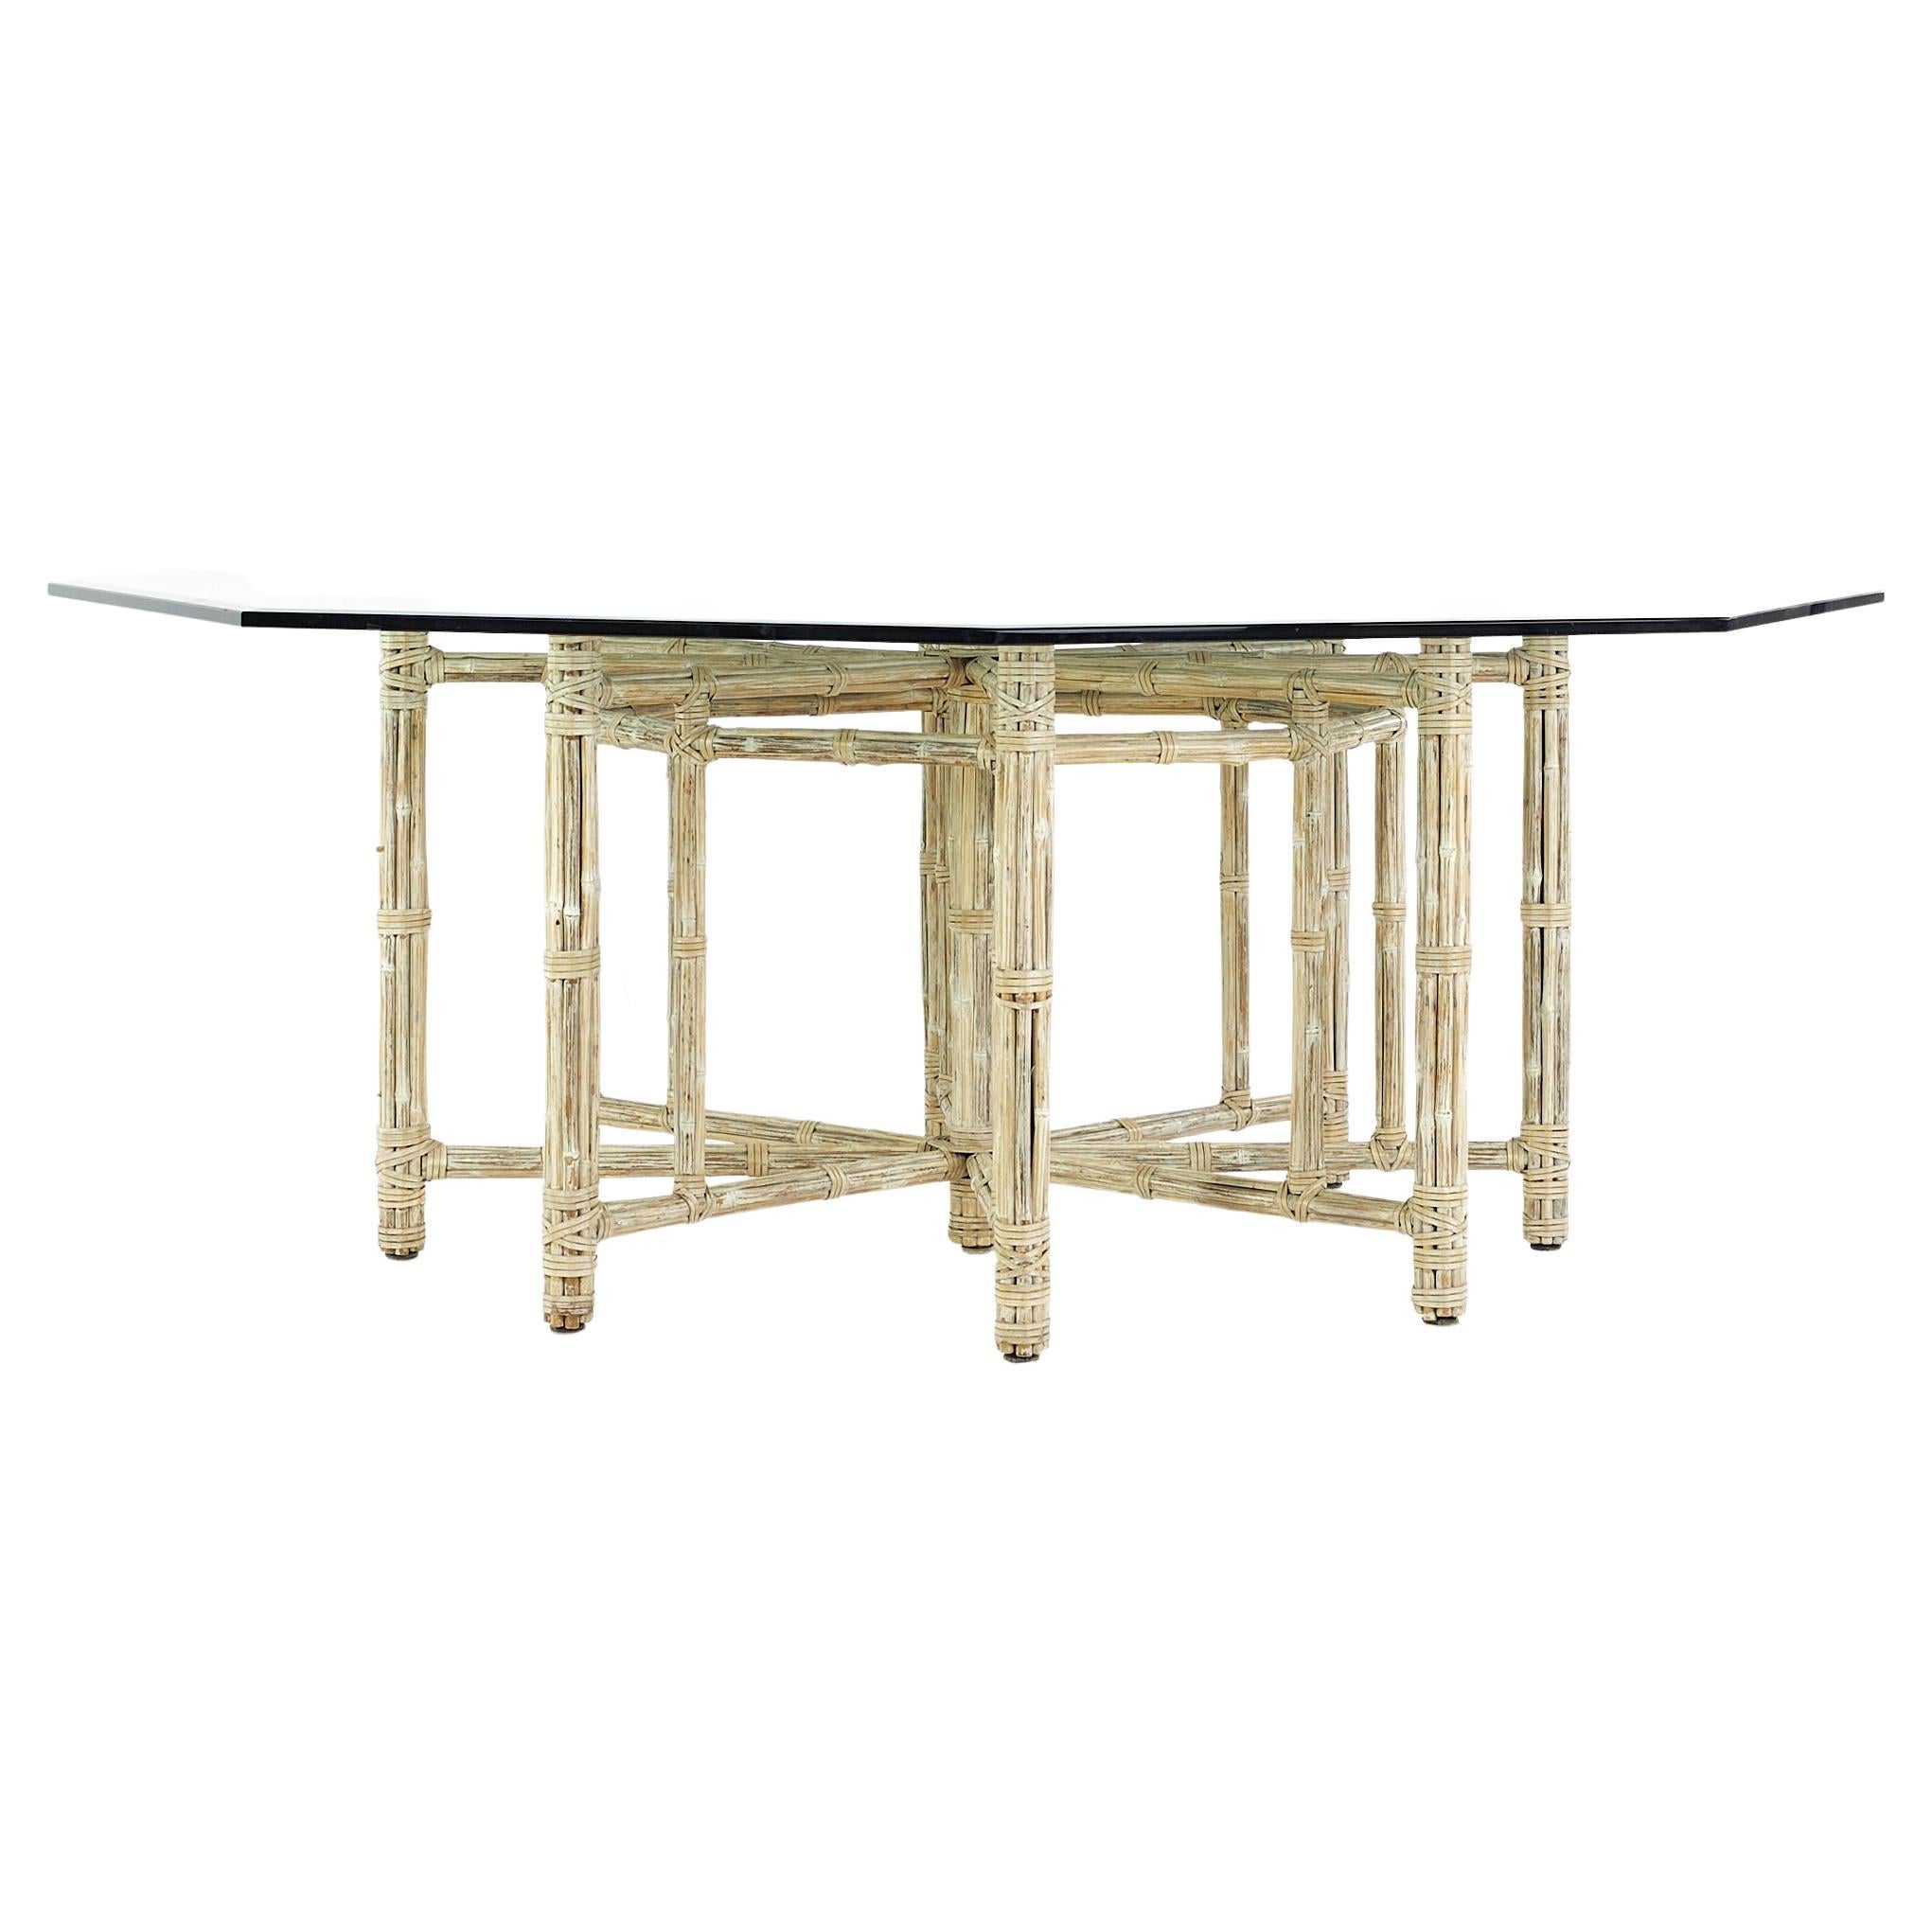 McGuire for Baker Furniture Mid Century Bamboo and Glass Hexagonal Dining Table For Sale